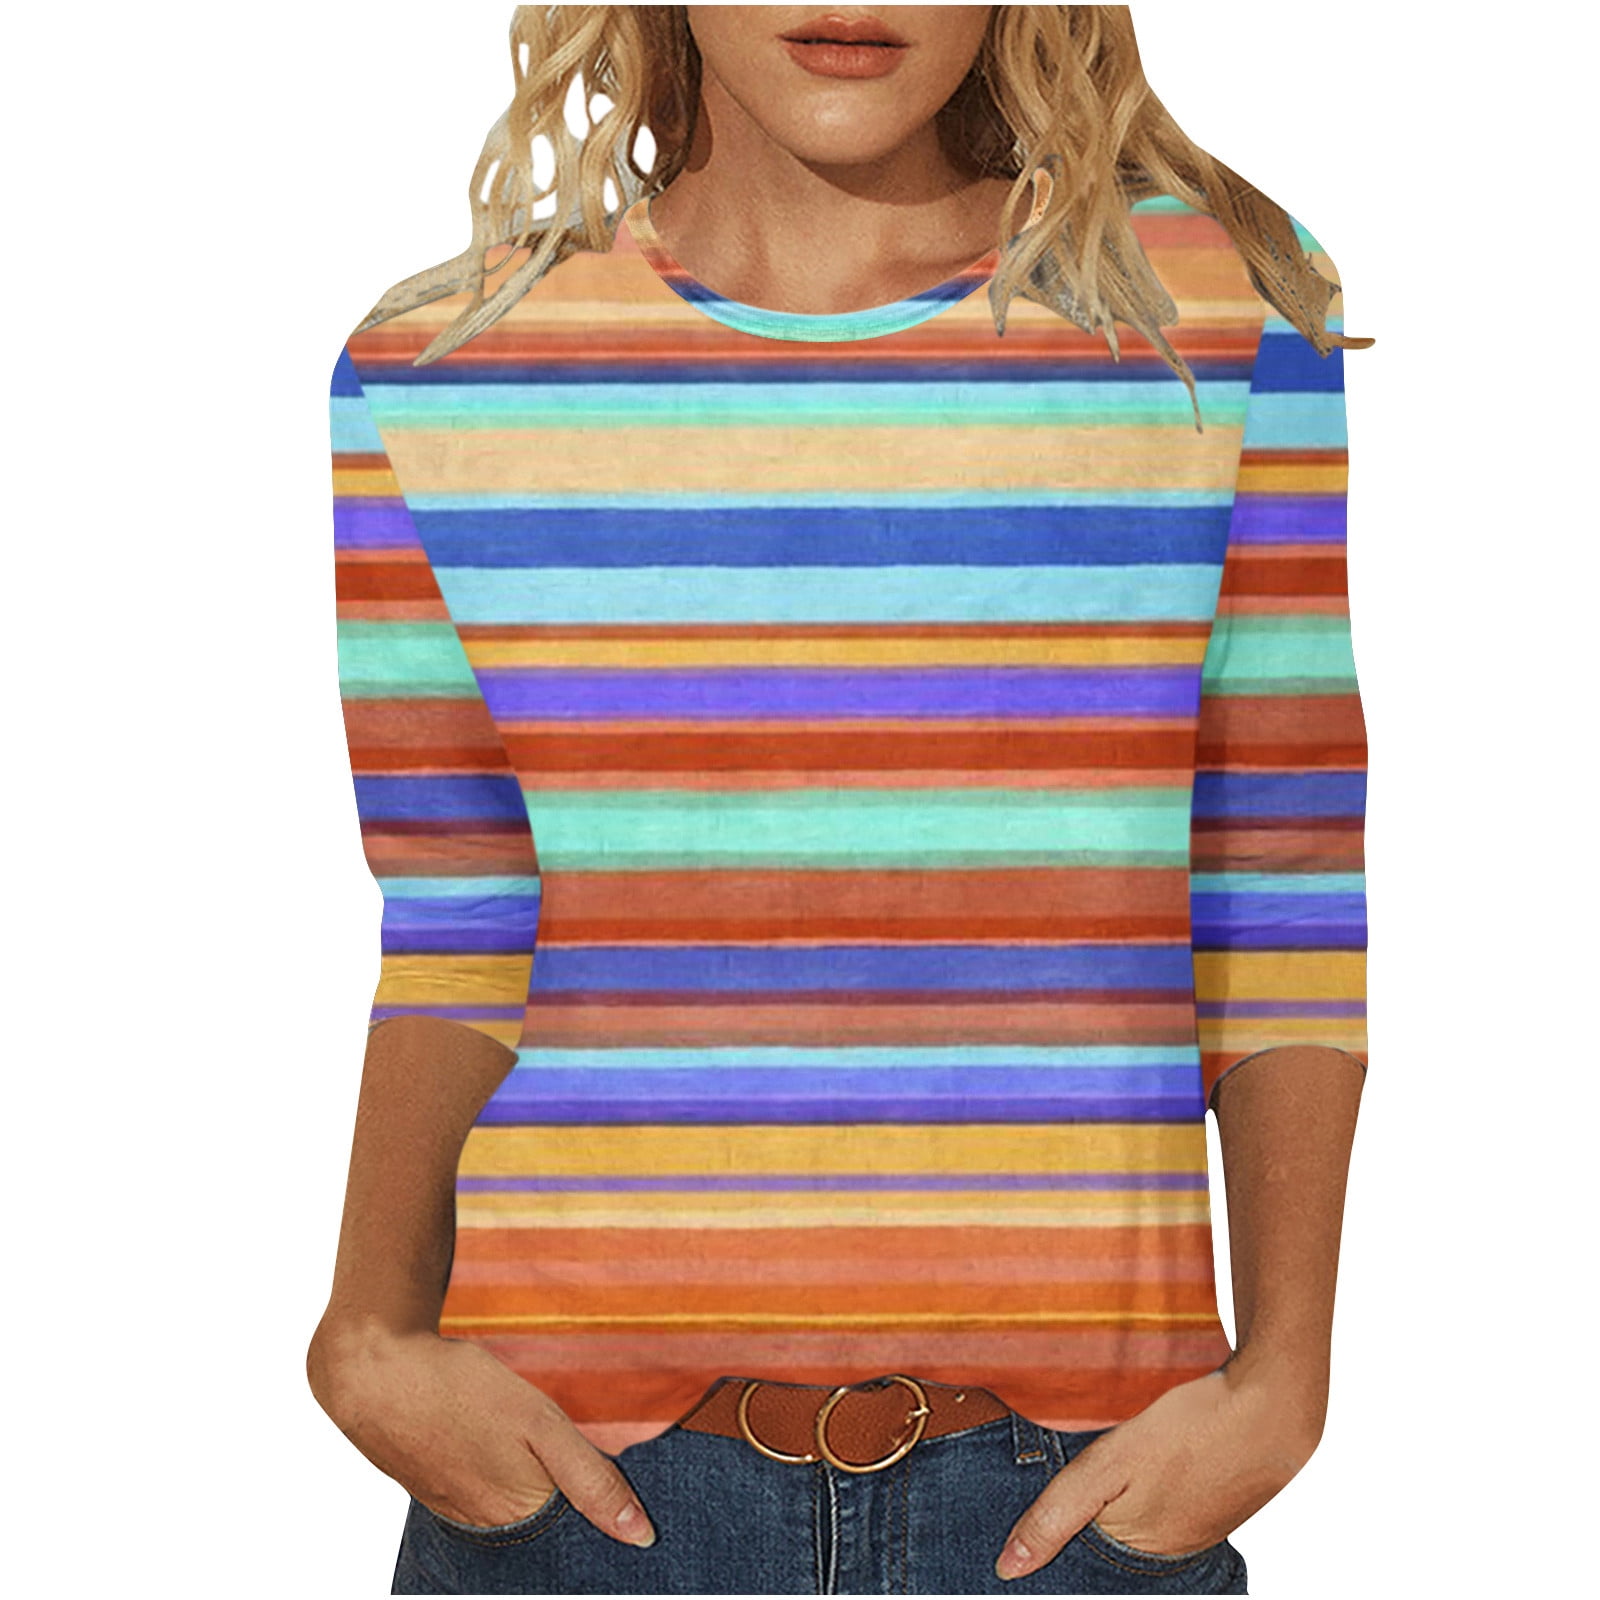 JGGSPWM Womens Rainbow Color Block Shirts Lovely 3/4 Sleeve Tops Comfy ...